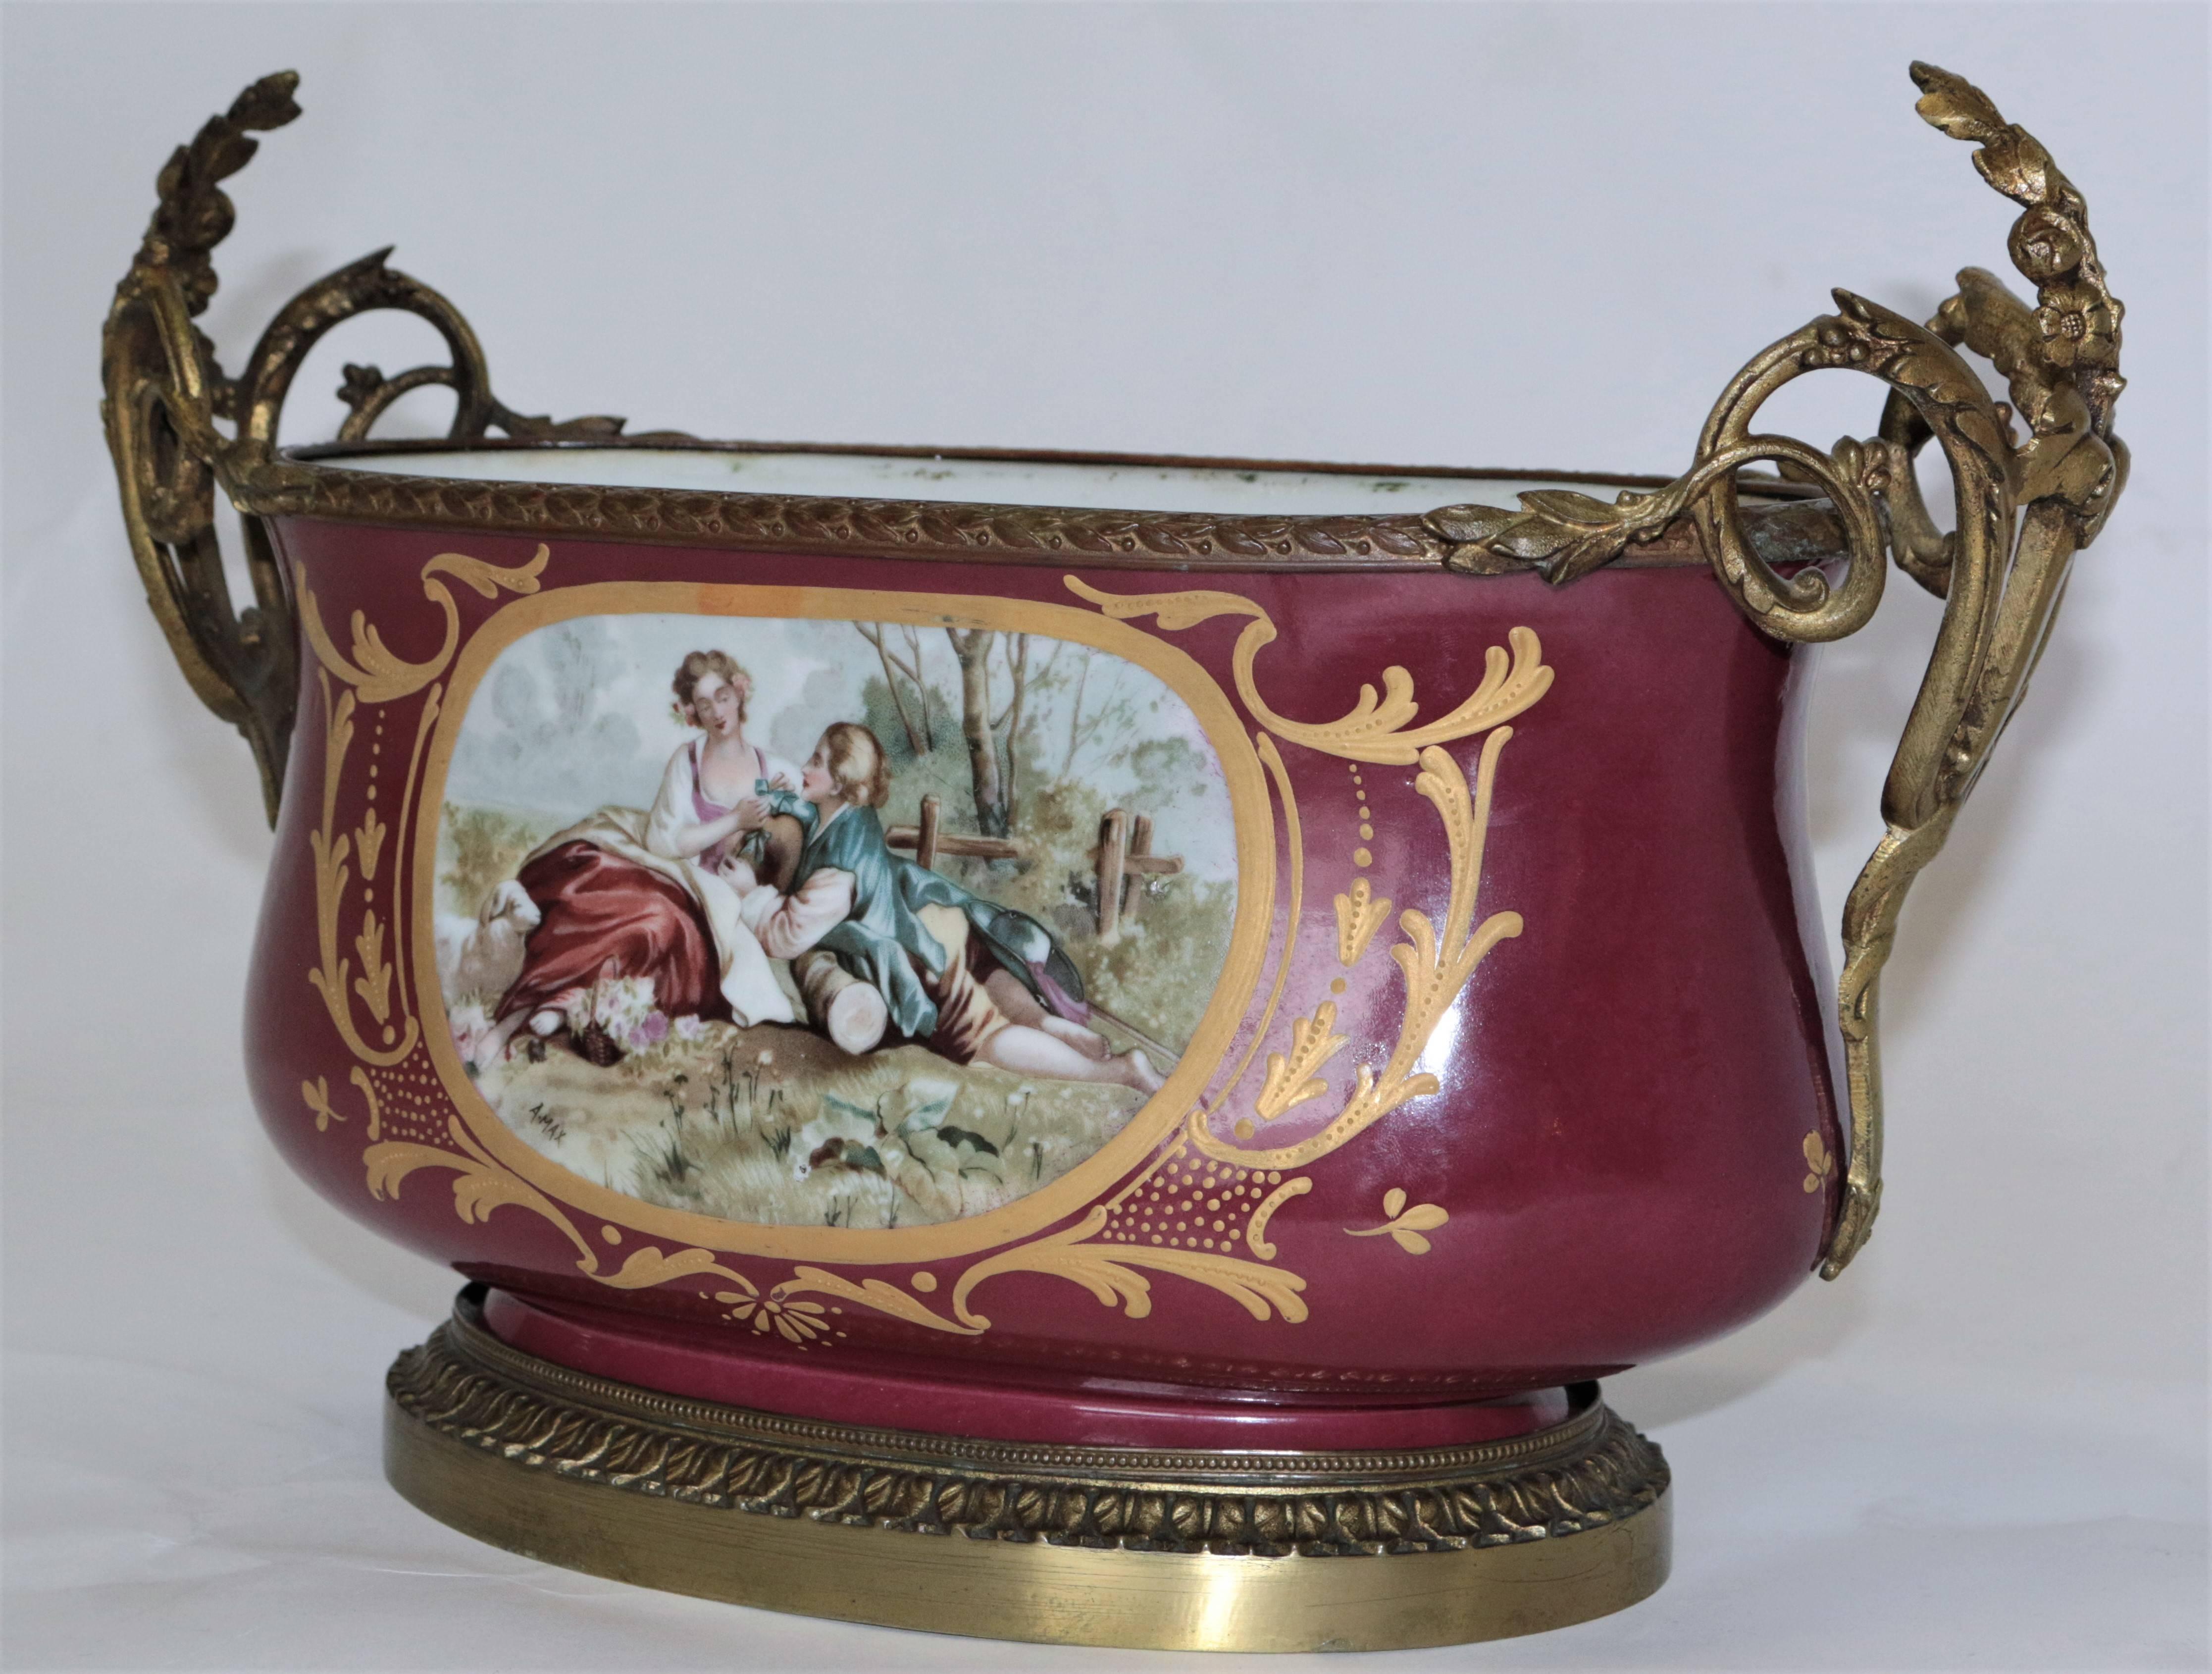 This amazing hand-painted center piece is in pristine condition. The portrait on the sevres depicts a picnic love scene. The bronze floral handles extend upward and overlap the lip. Throughout the entire piece detailed precision is shown.